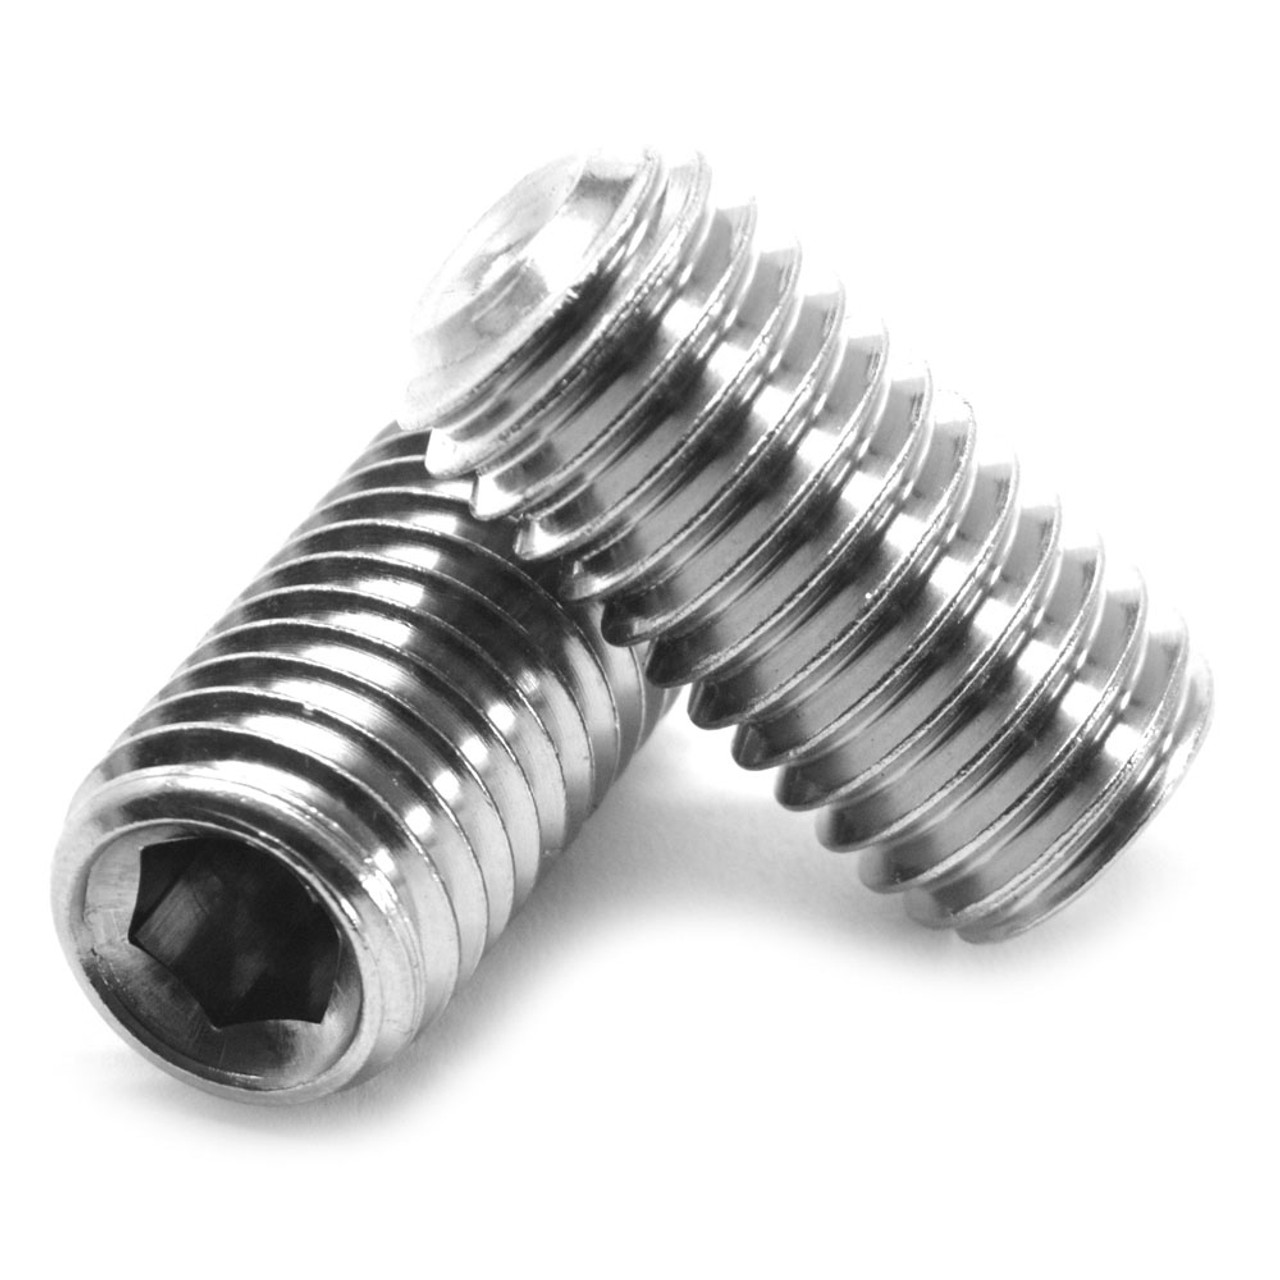 M1.6 x 0.35 x 6 MM Coarse Thread DIN 916 / ISO 4029 Socket Set Screw Cup Point Stainless Steel 18-8